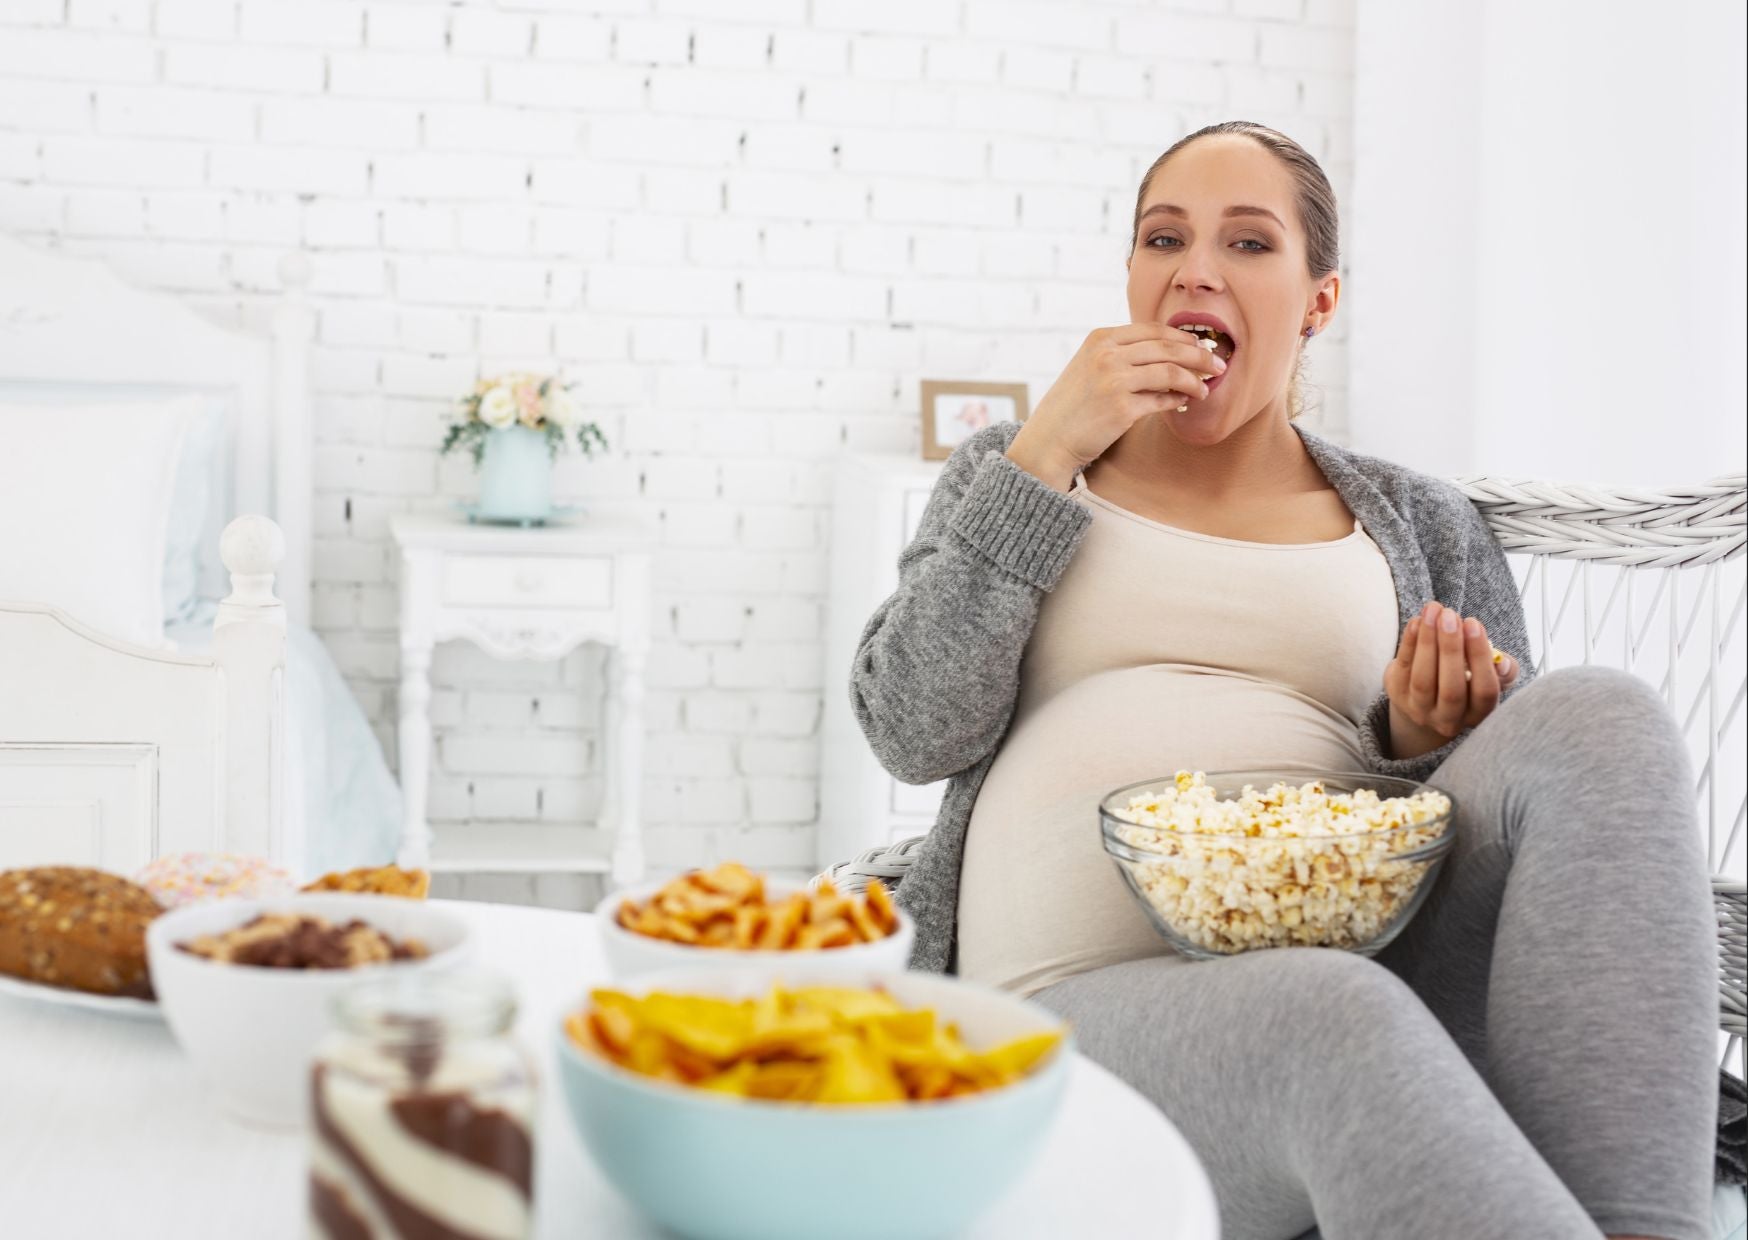 Healthy Snacking During Pregnancy - Tips from the360mix